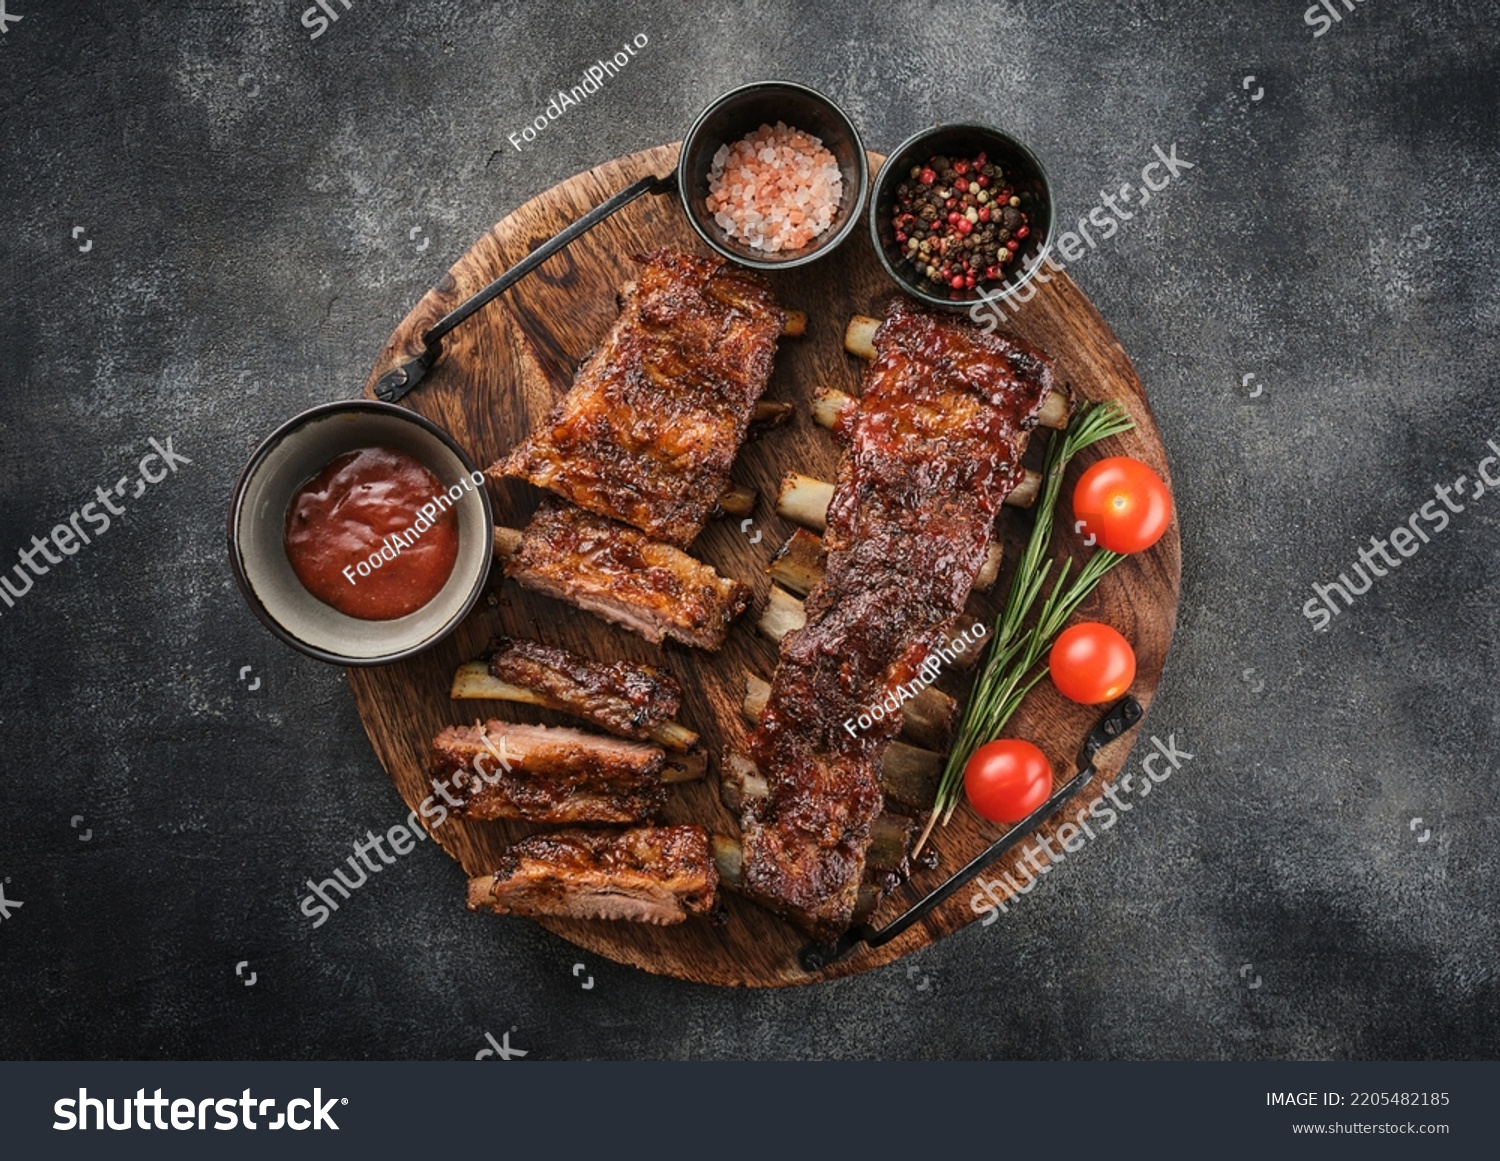 Delicious barbecued ribs seasoned with a spicy basting sauce. Smoked American style pork ribs. #2205482185